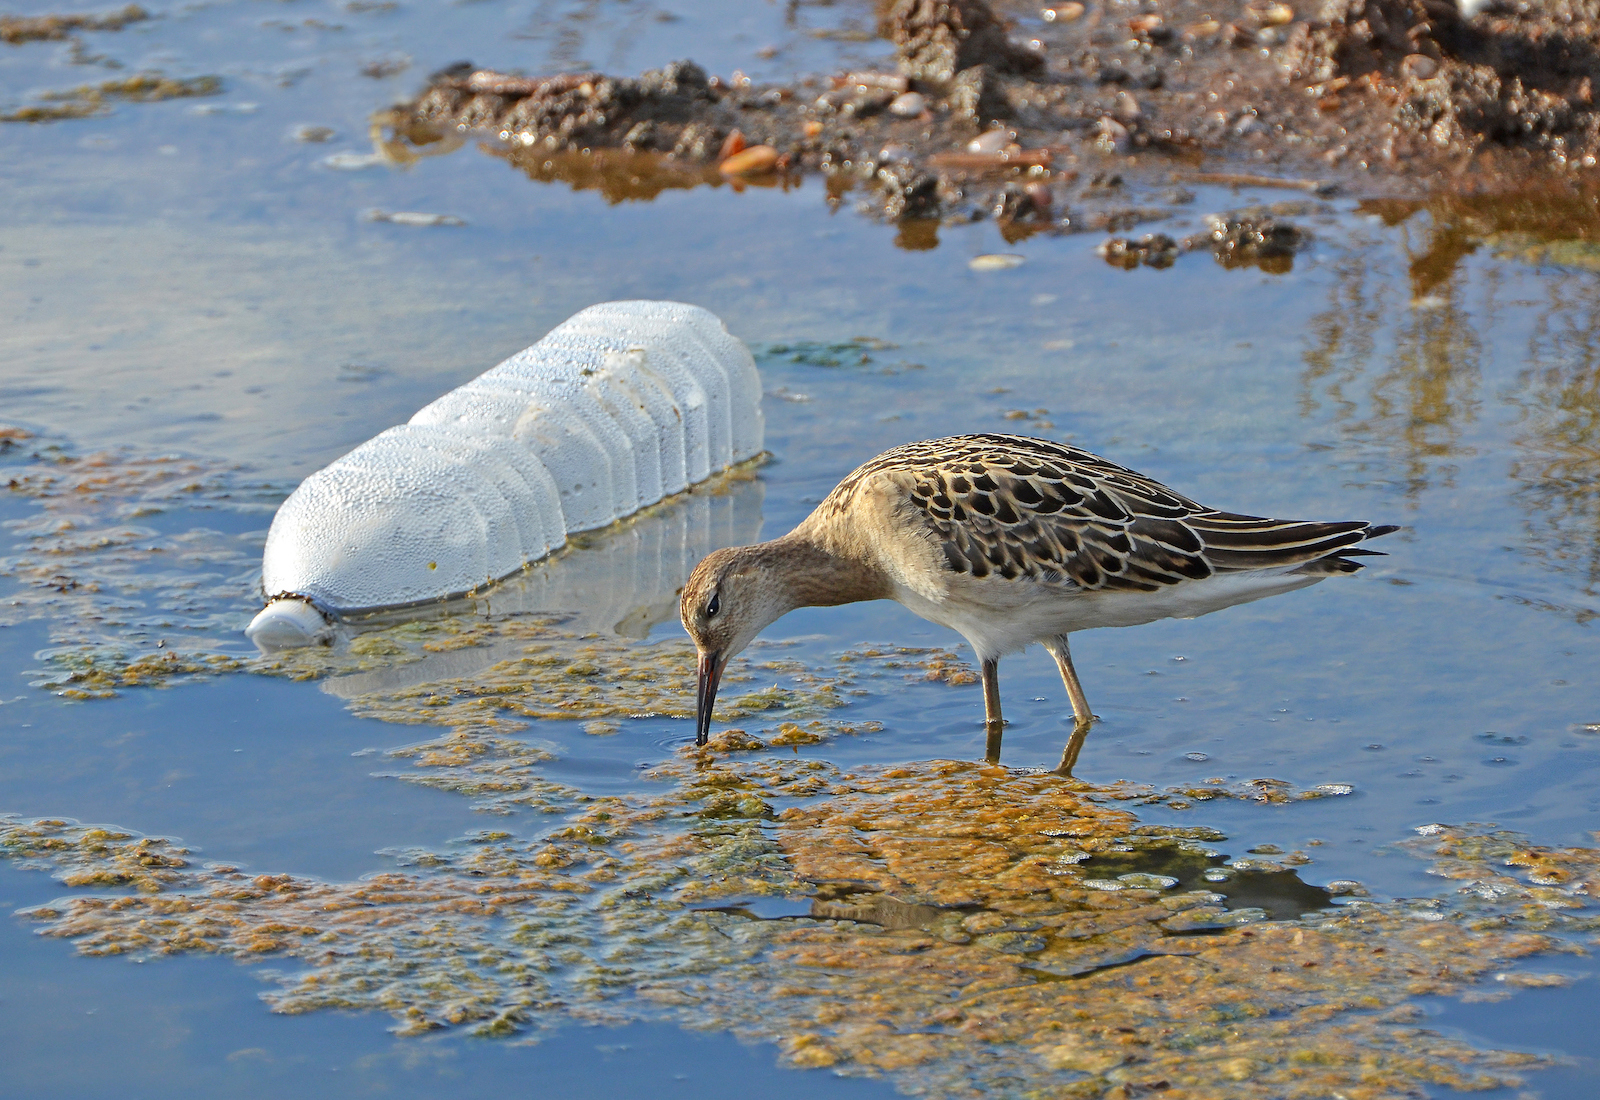 A sandpiper in a marsh with plastic water bottle nearby